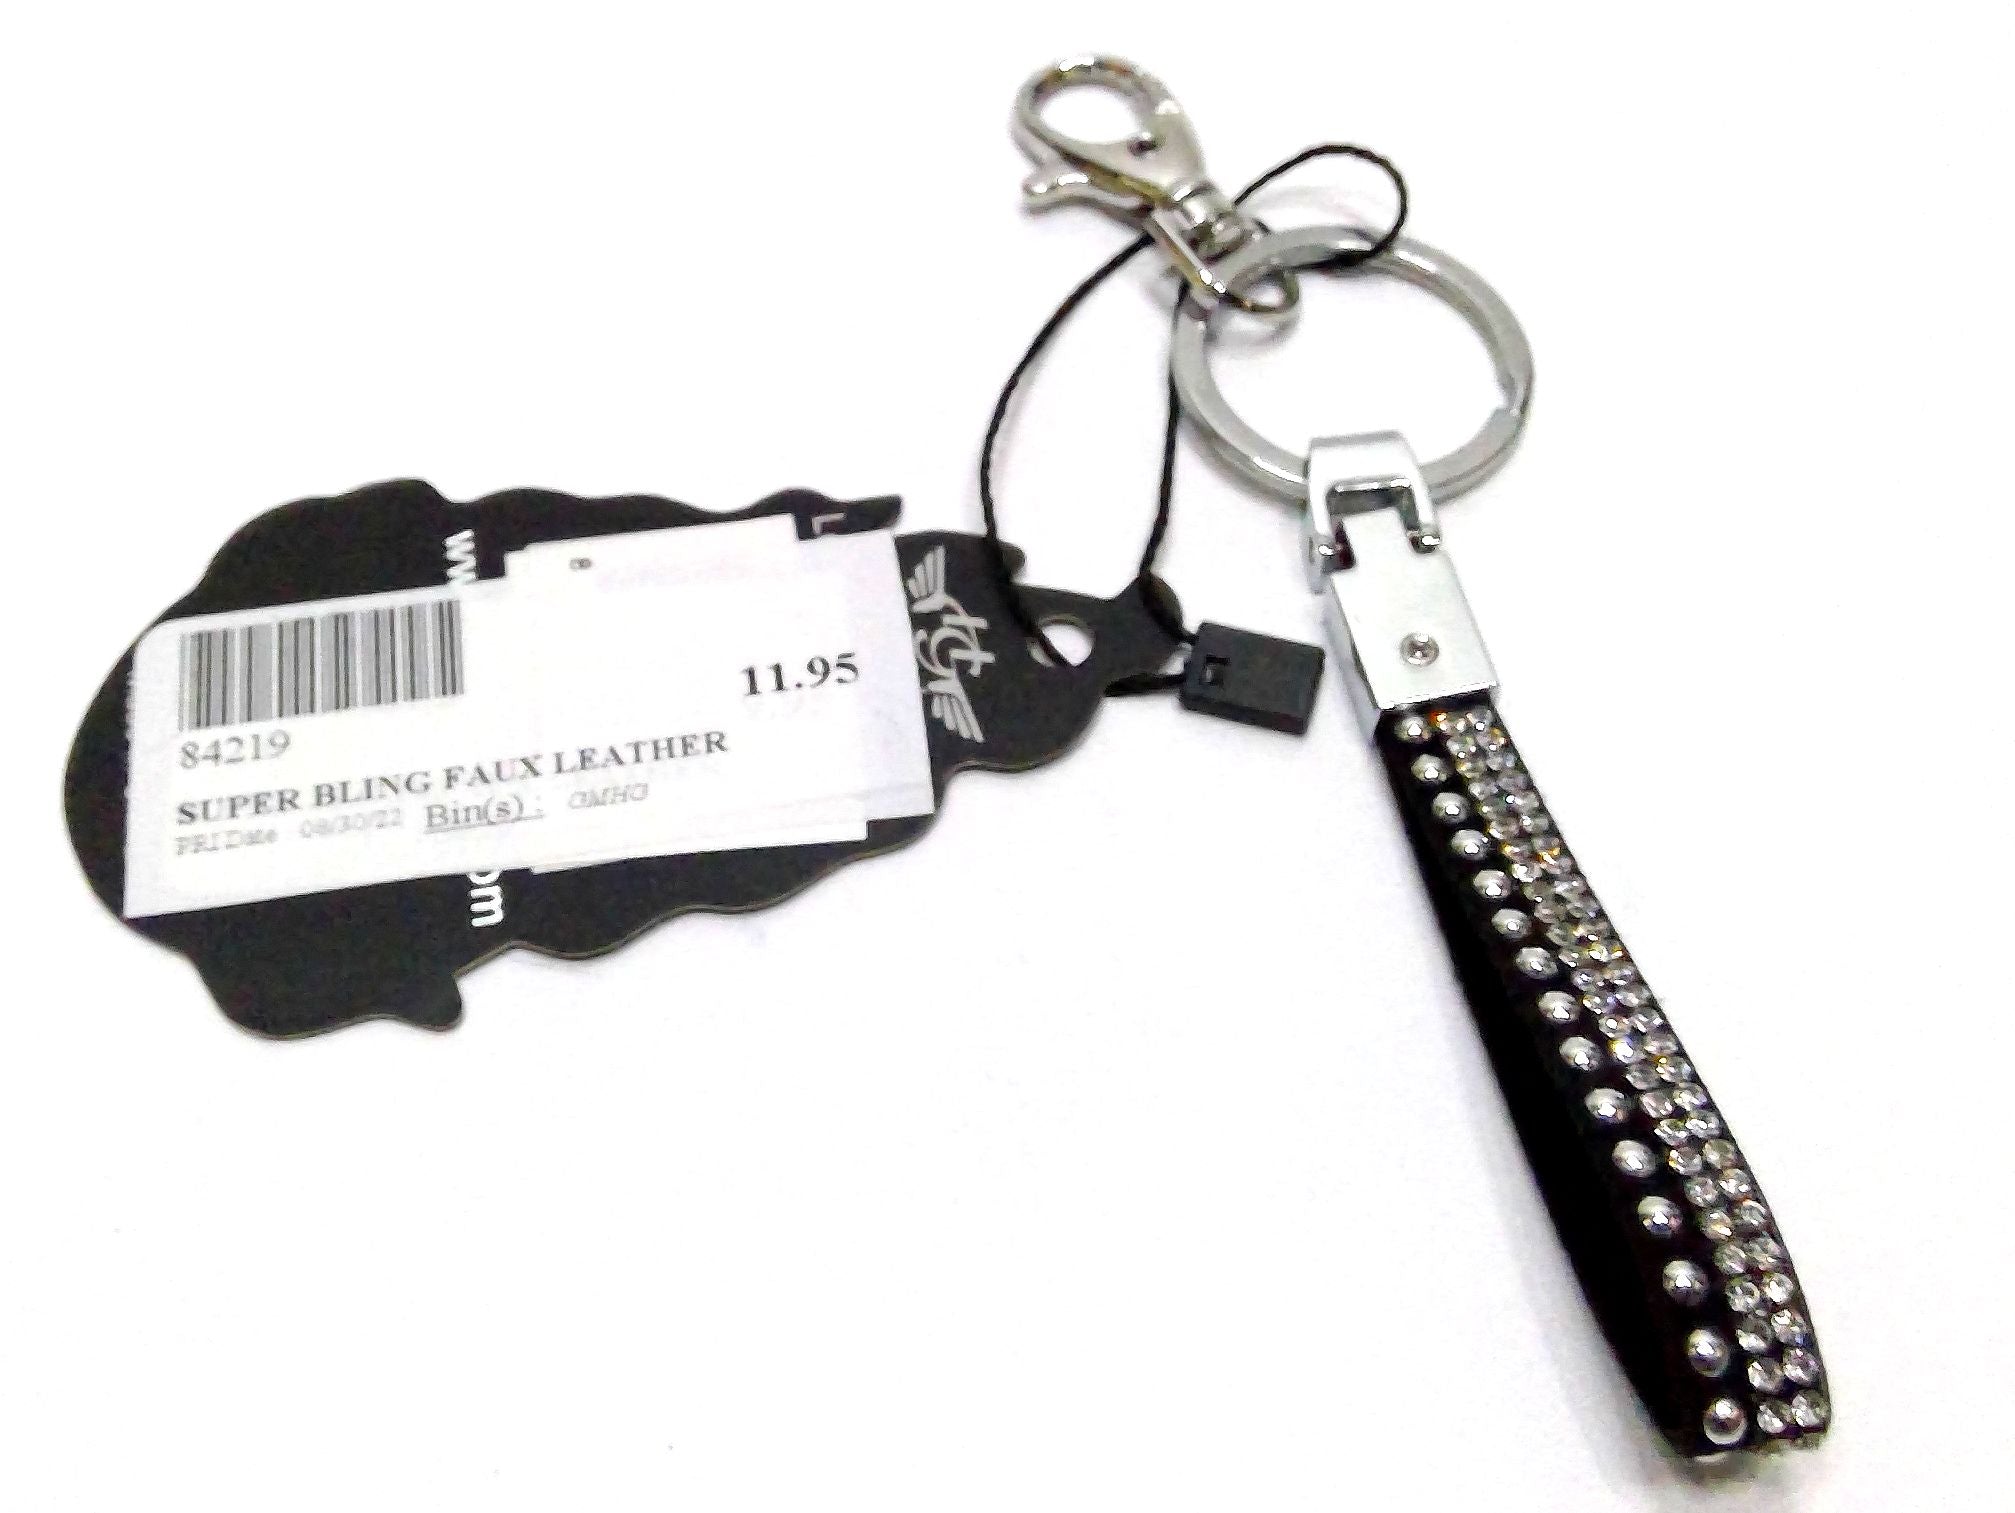 NEW Genuine Harley Super Bling Faux Leather Keychain HG84219